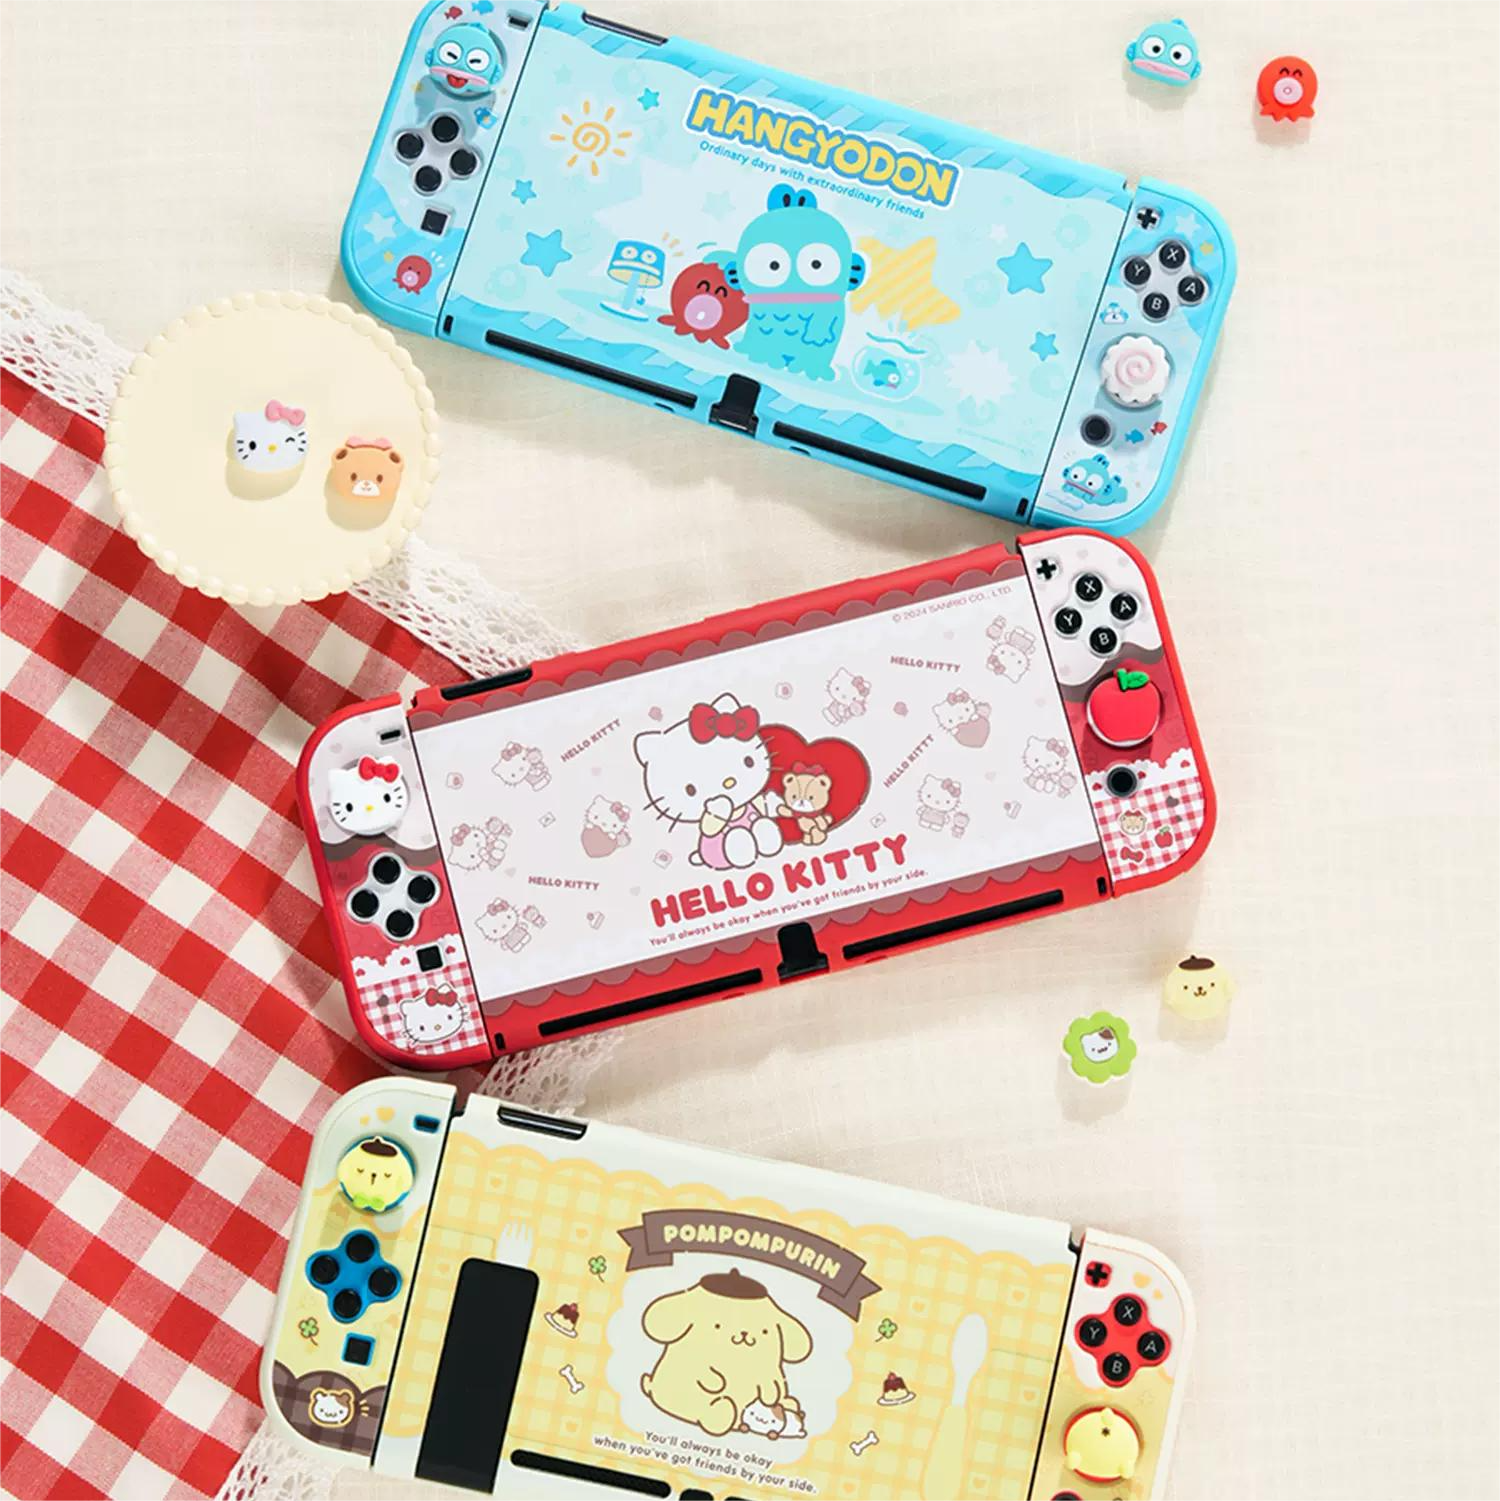 GeekShare X Sanrio Collaboration: More Characters Waiting To Be Unlocked